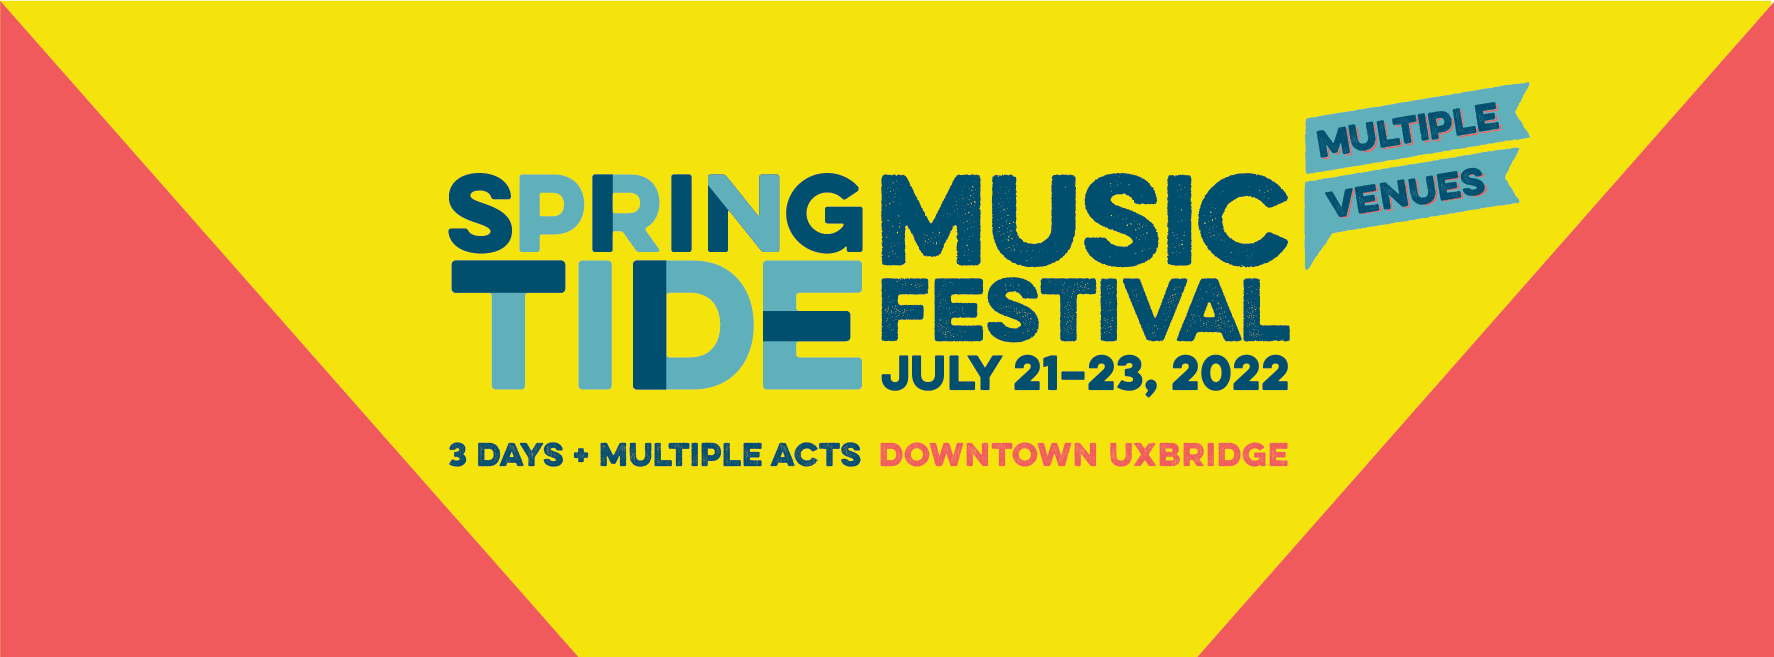 Image is of a graphic with a yellow and red background. Text in blue reads the Springtide Music Festival taking place on July 21-23 at multiple venues in downtown Uxbridge.